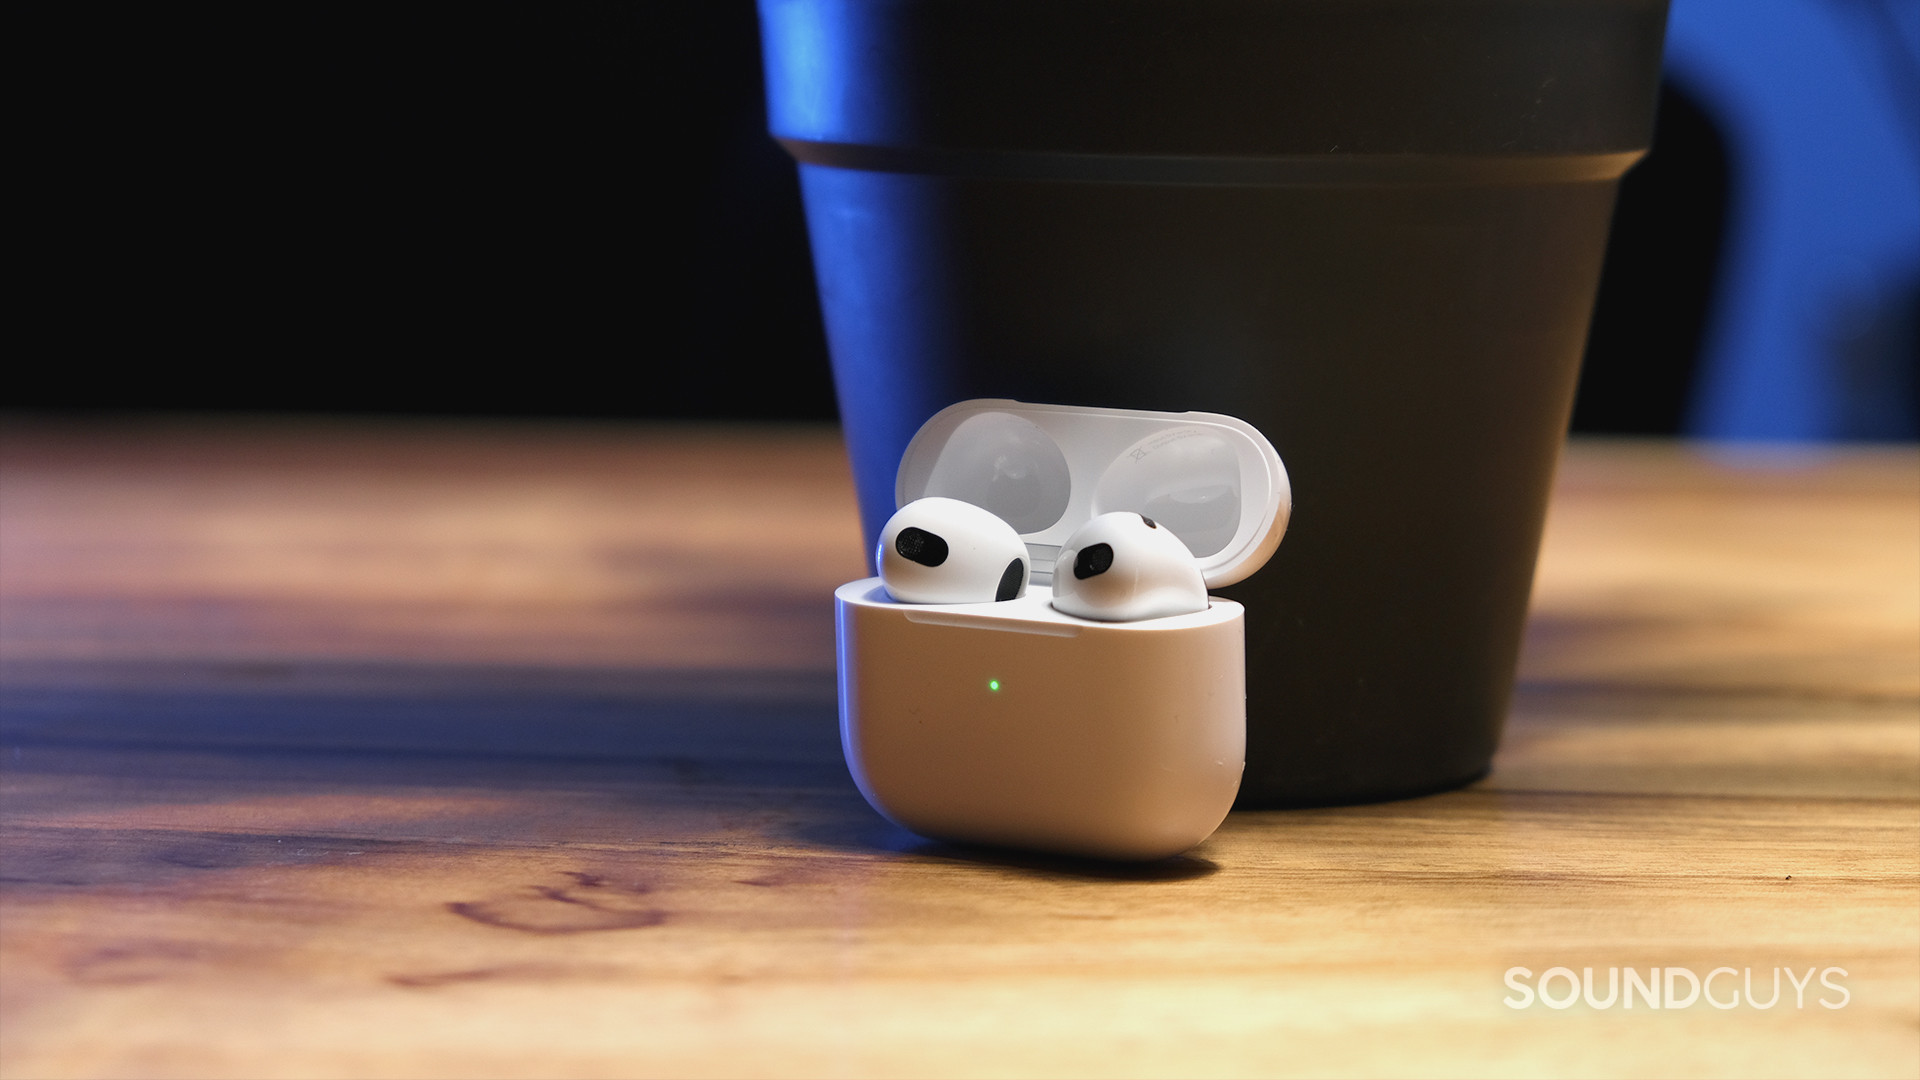 AirPods 3rd Generation in their case sitting next to a black flower pot on a wood table.